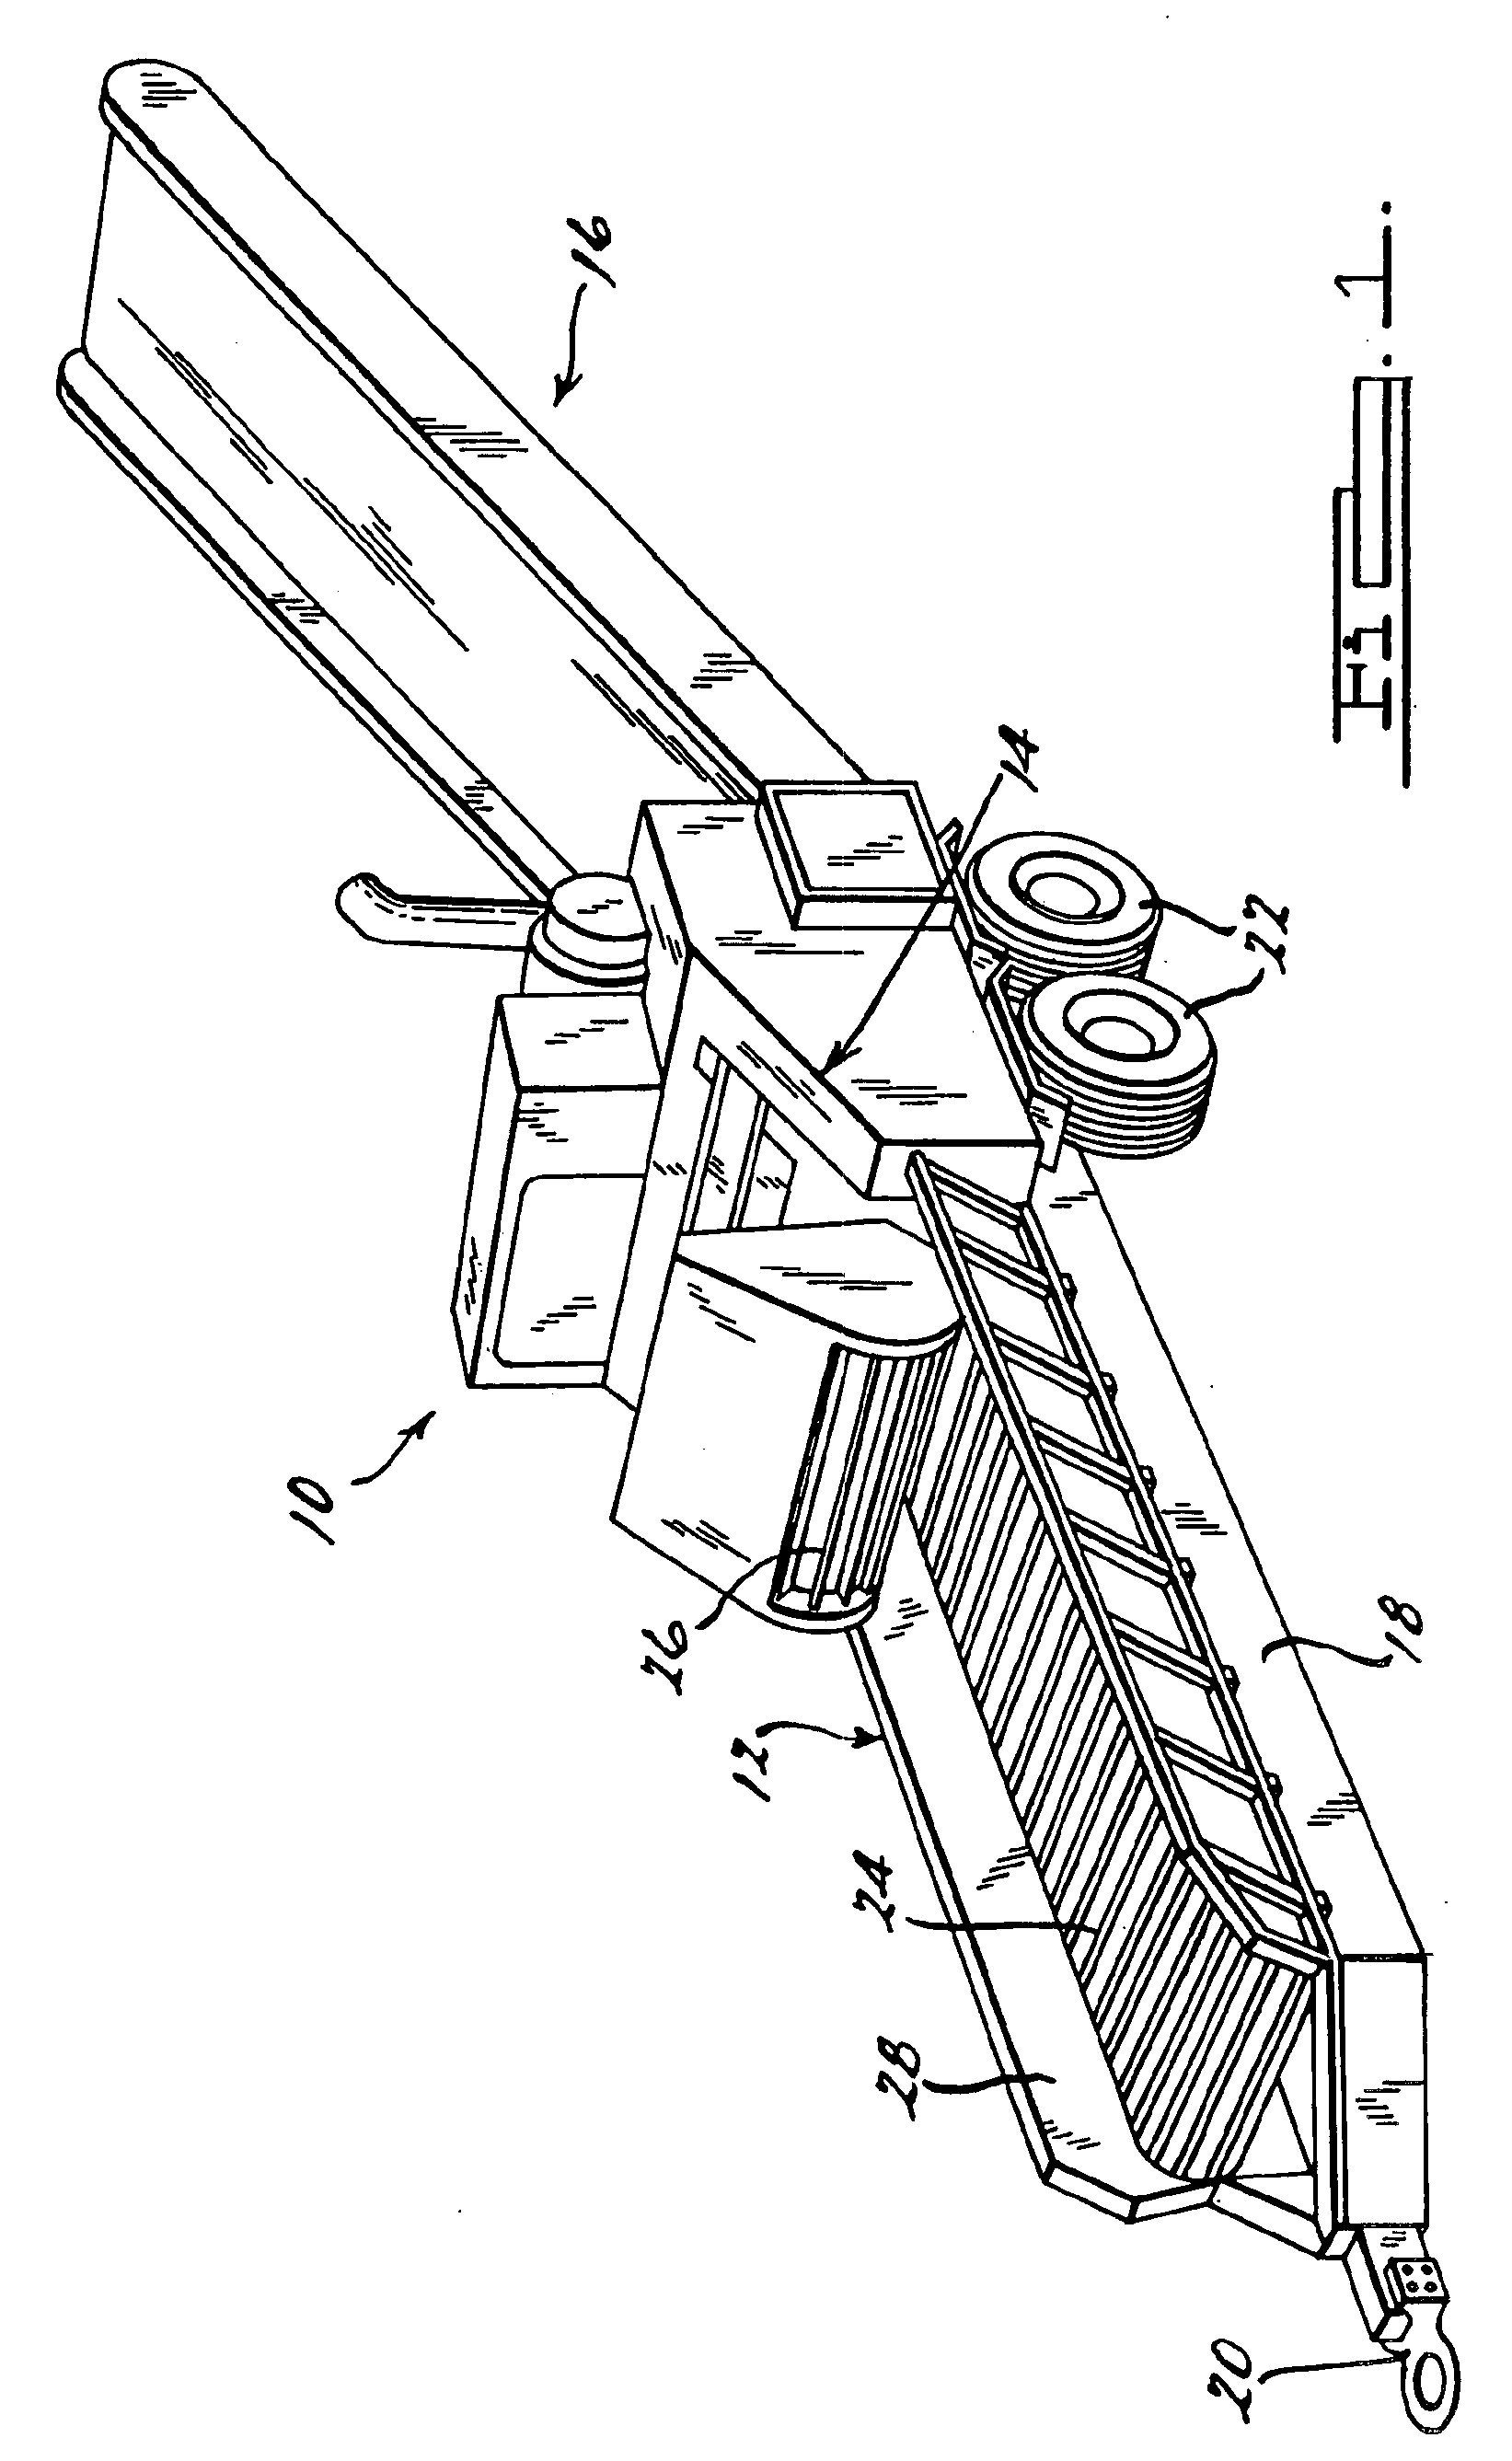 Multi-functional tool assembly for processing tool of waste processing machine